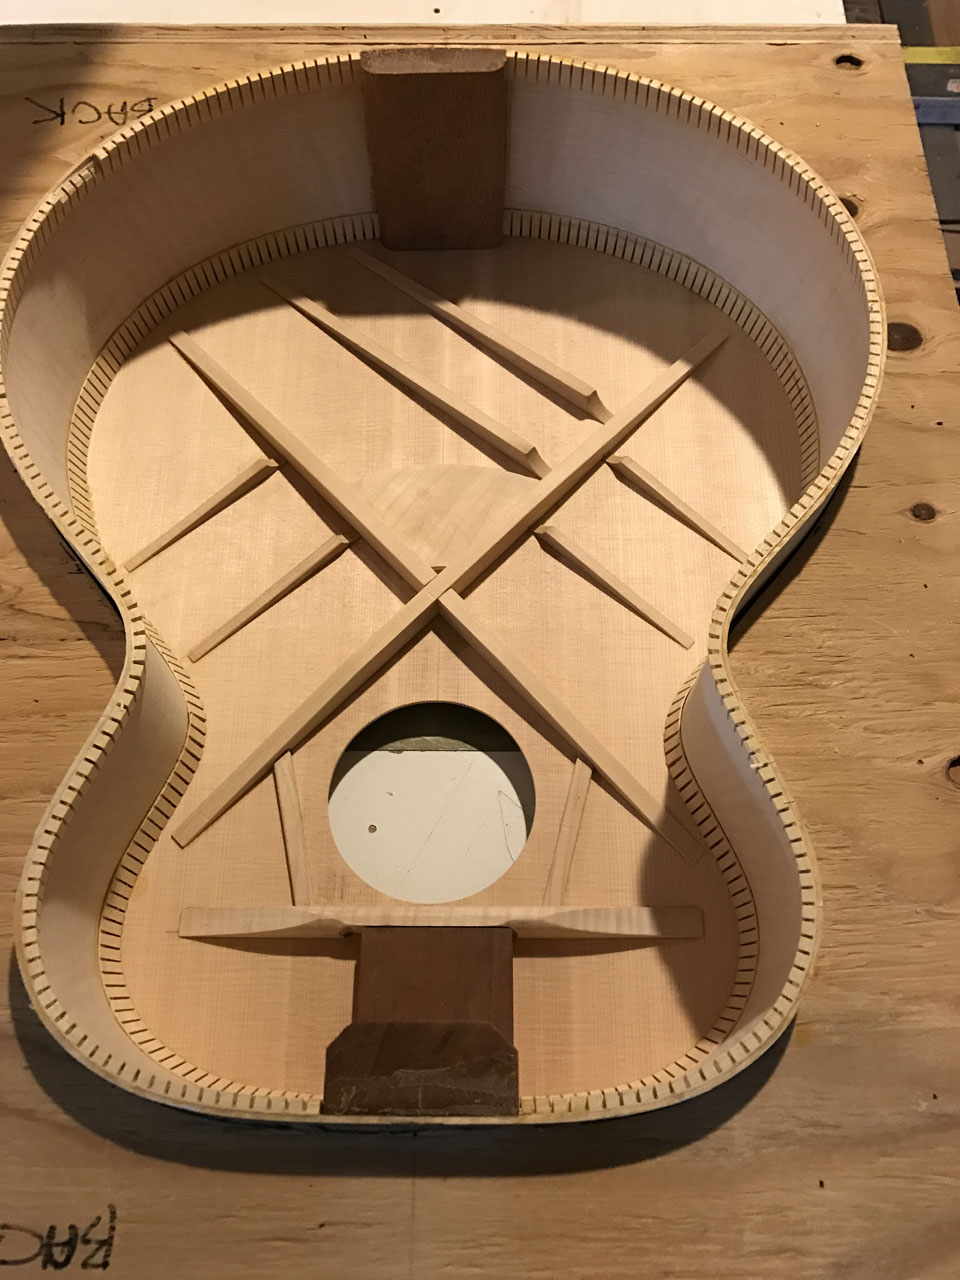 LOOKING AT THE INSIDE OF A JUMBO BODY WITH THE TOP GLUED INTO PLACE. BRIDGE PLATE HAS BEEN FITTED BELOW THE "X" BRACE. SOUND HOLE ON THIS ONE HAS NOT BEEN BOUND YET.